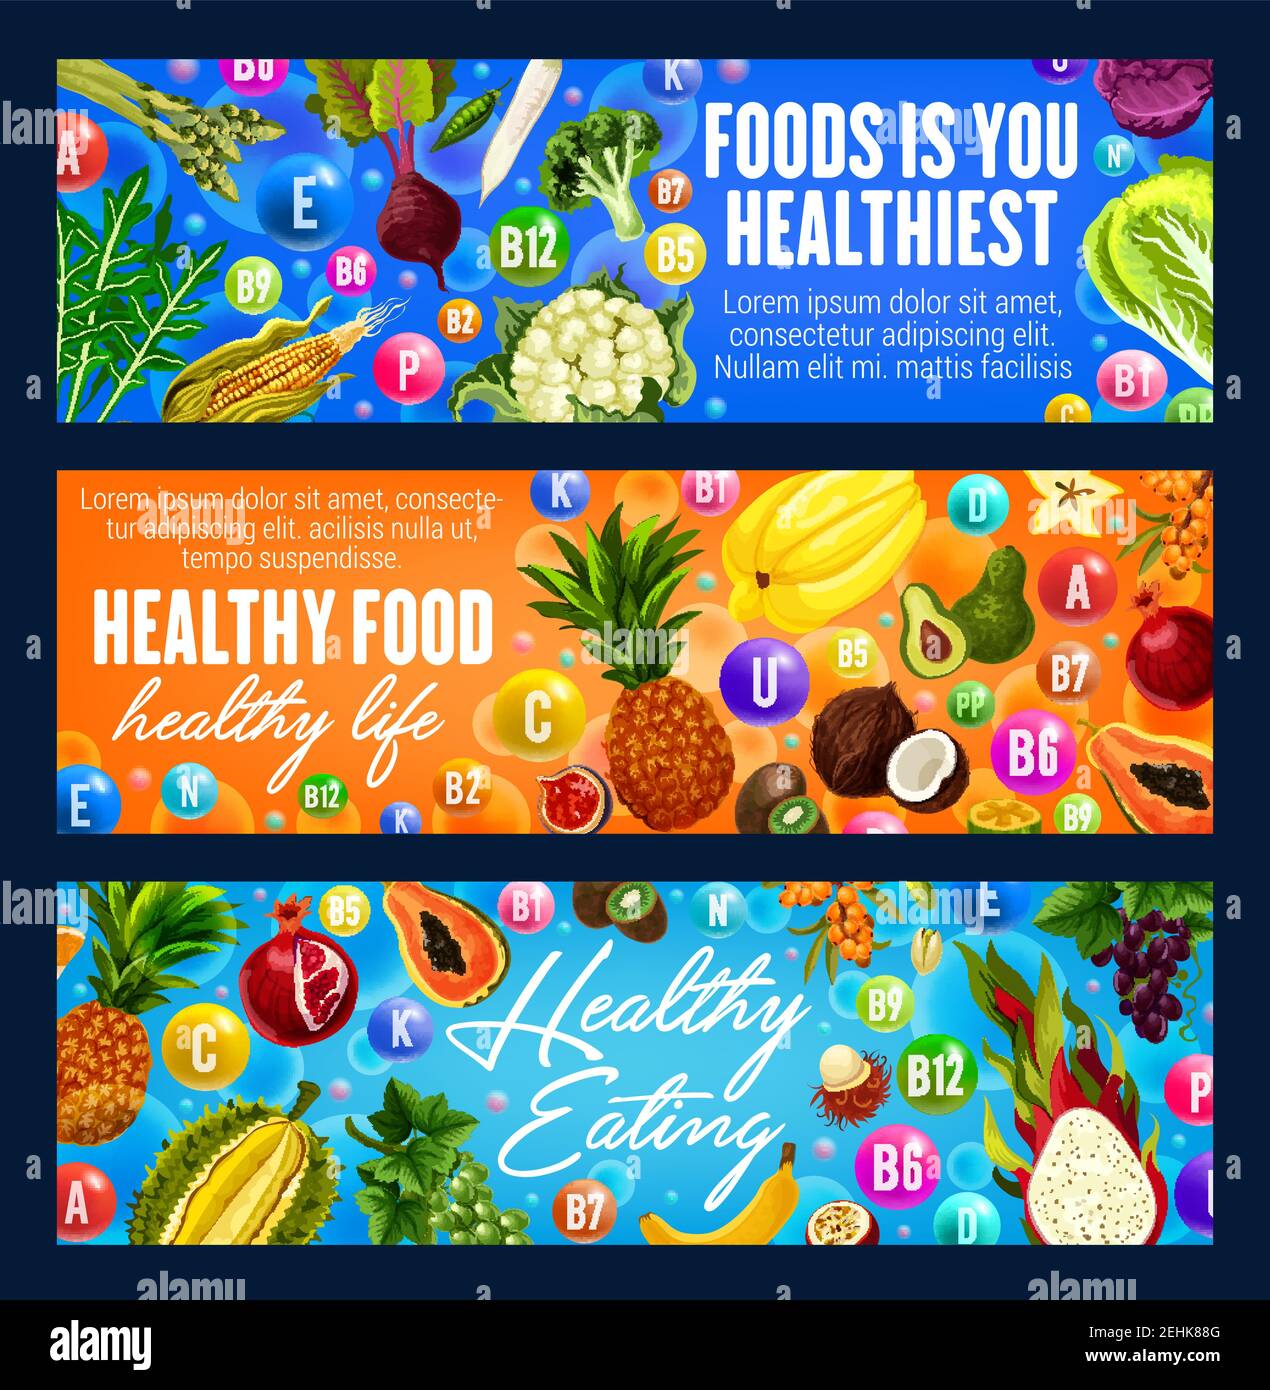 Healthy food banners with fruits, vegetables and vitamins. Promotion of healthy eating organic products, healthiest food dieting ingredients, exotic t Stock Vector